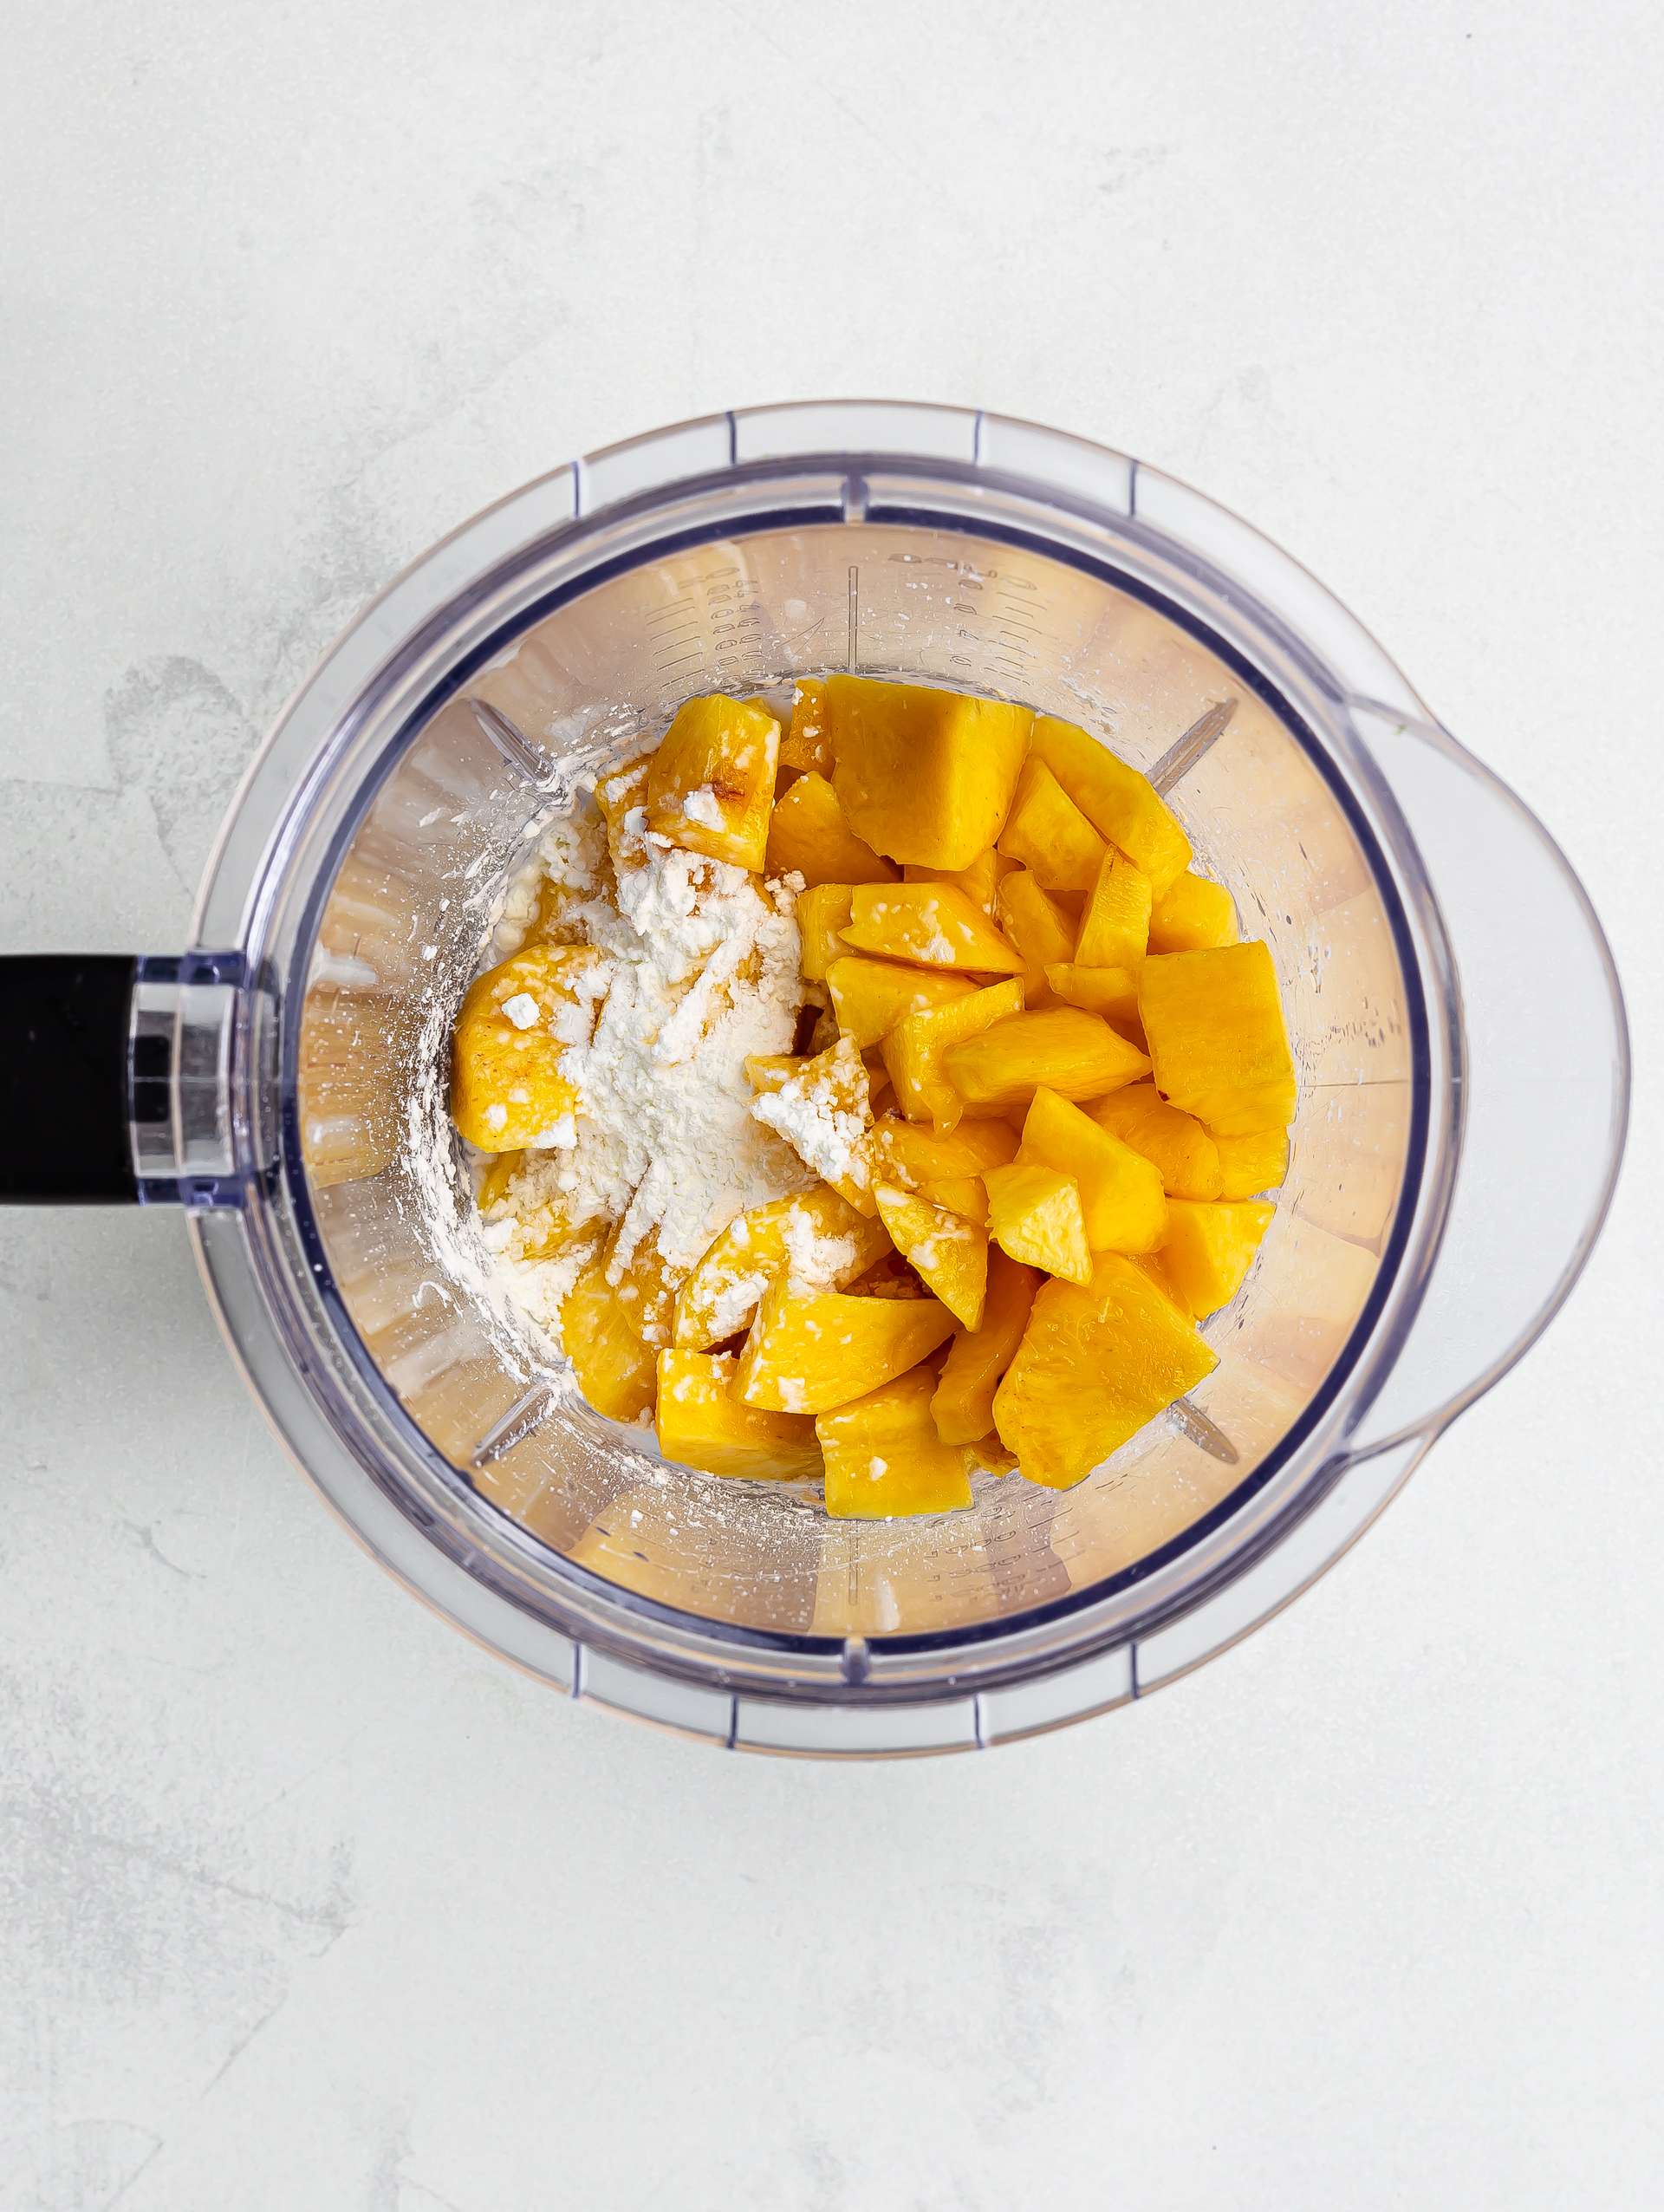 peach starch and oat milk in a blender